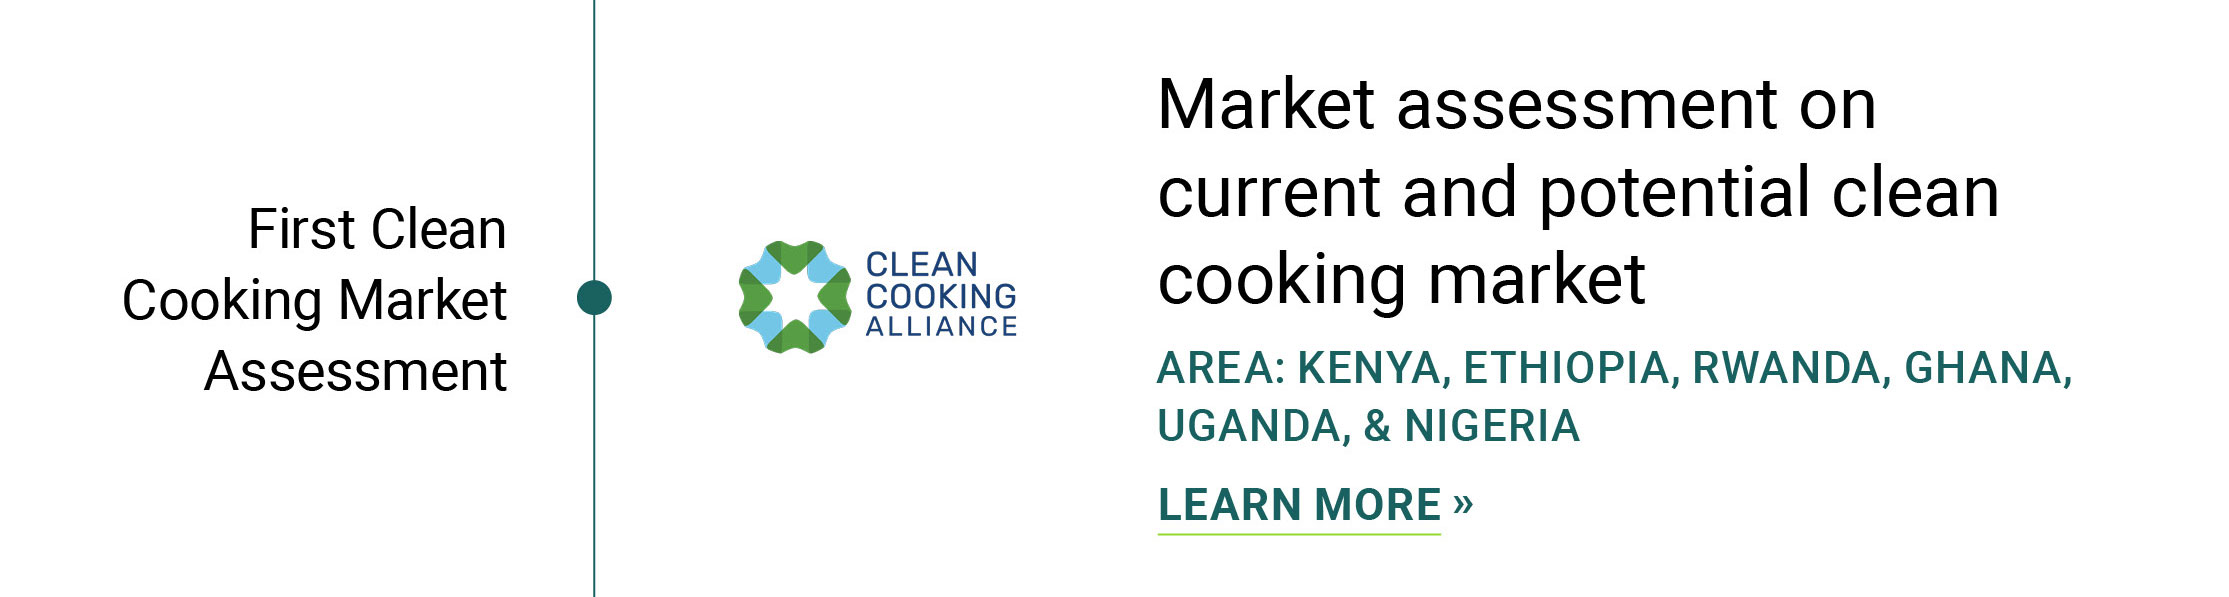 Oct 2021 Market assessment on current and potential clean cooking market  in six African countries.  Clean Cooking Alliance Kenya, Ethiopia, Rwanda, Ghana, Uganda Nigeria First Clean Cooking Market Assessment